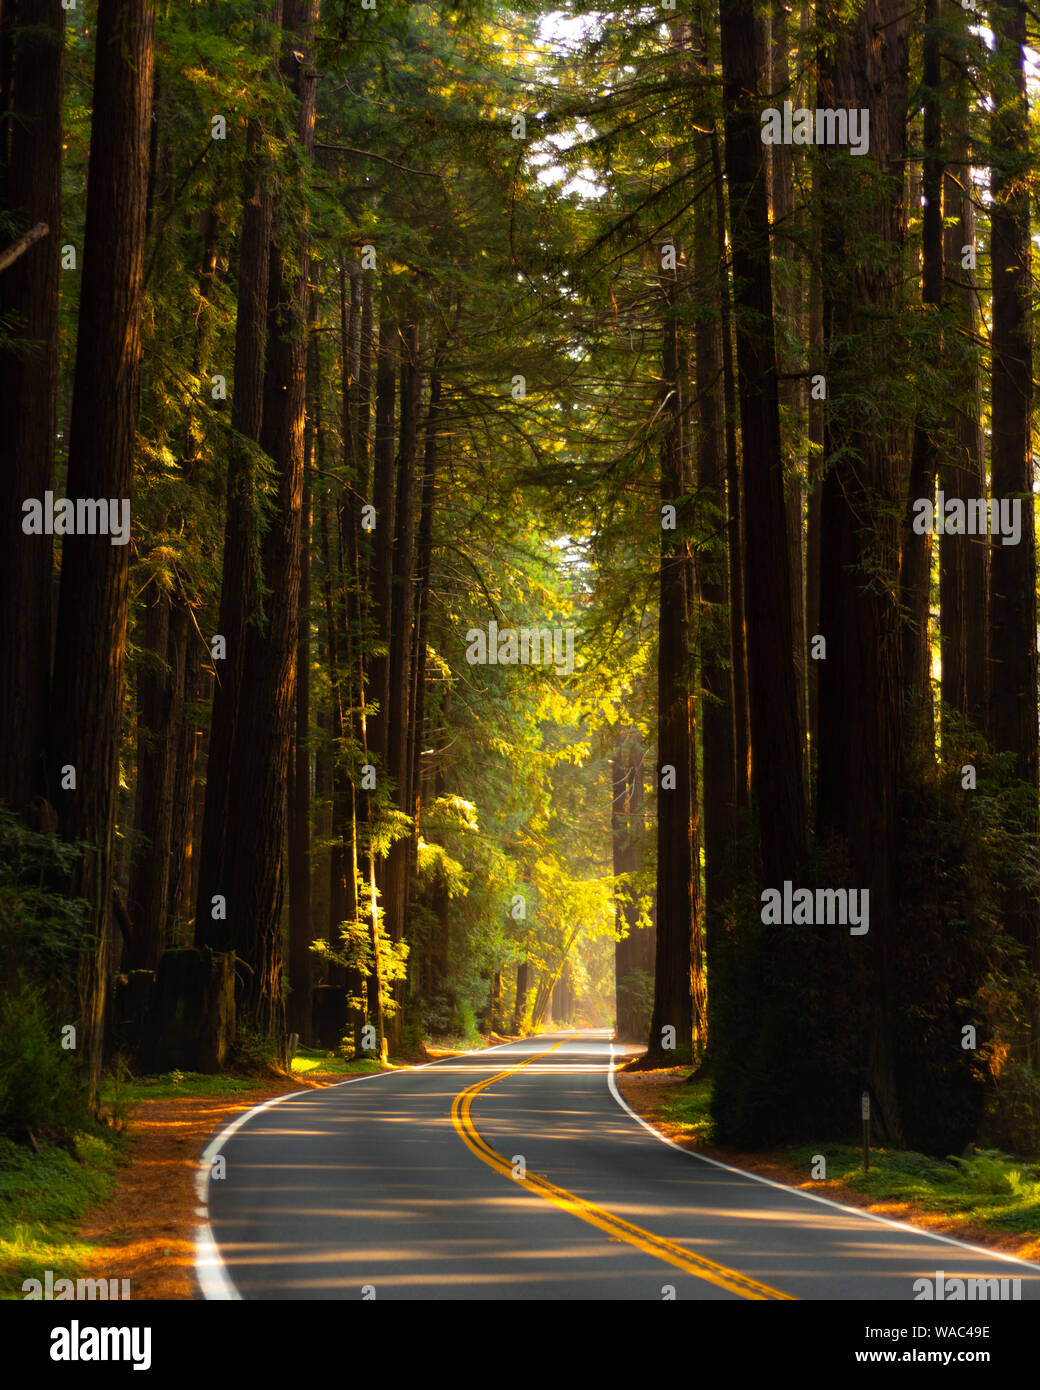 Highway 128 in Mendocino in the Old Growth Redwoods Stock Photo